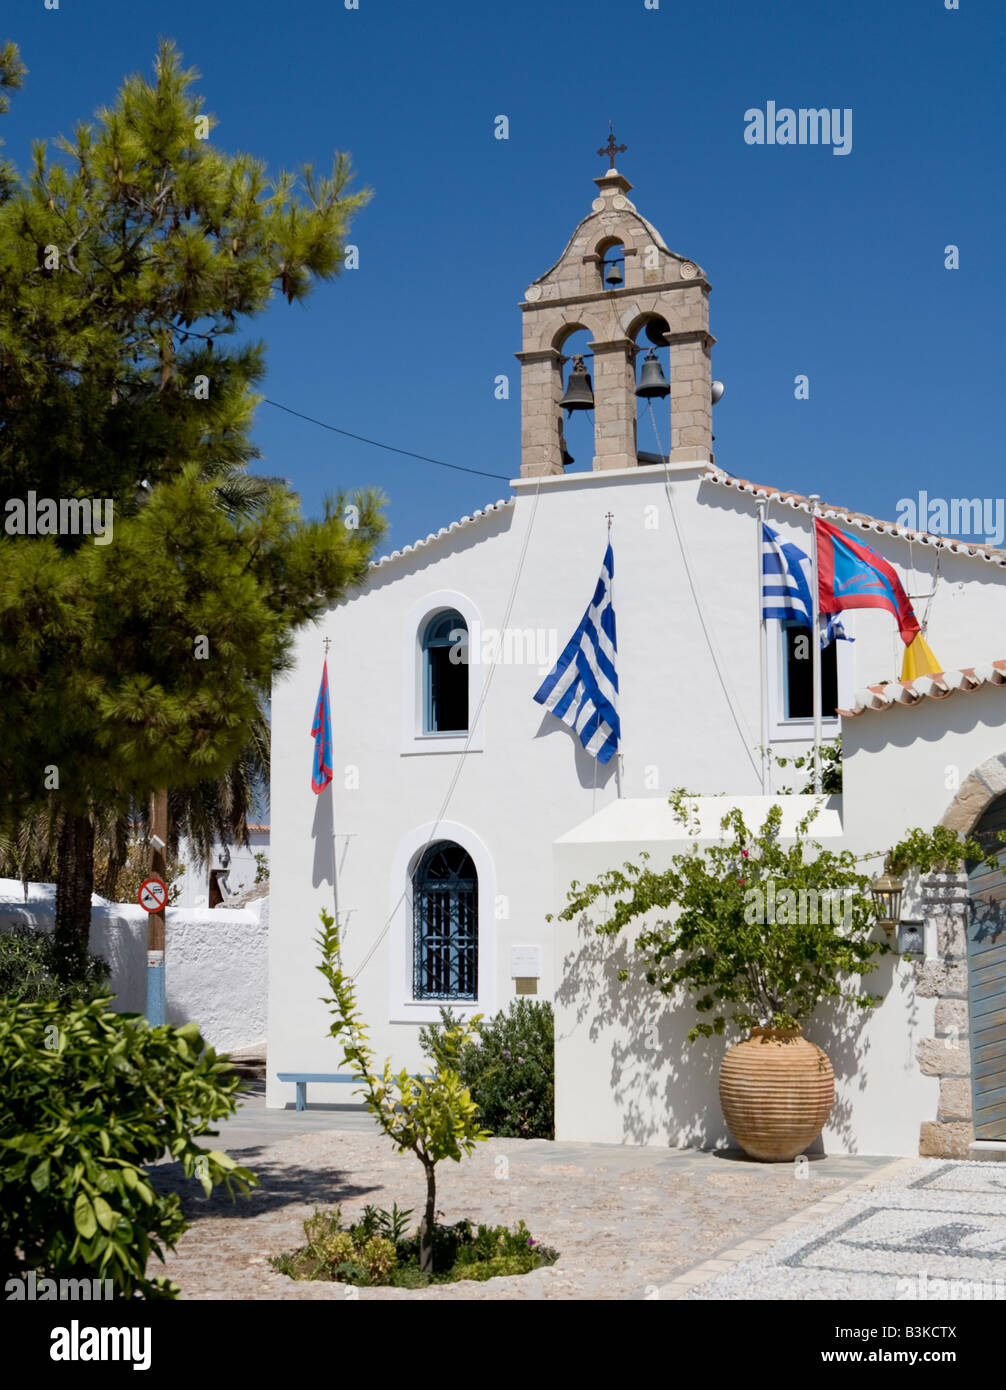 Traditional Church And Buildings, Spetses, Greece Stock Photo